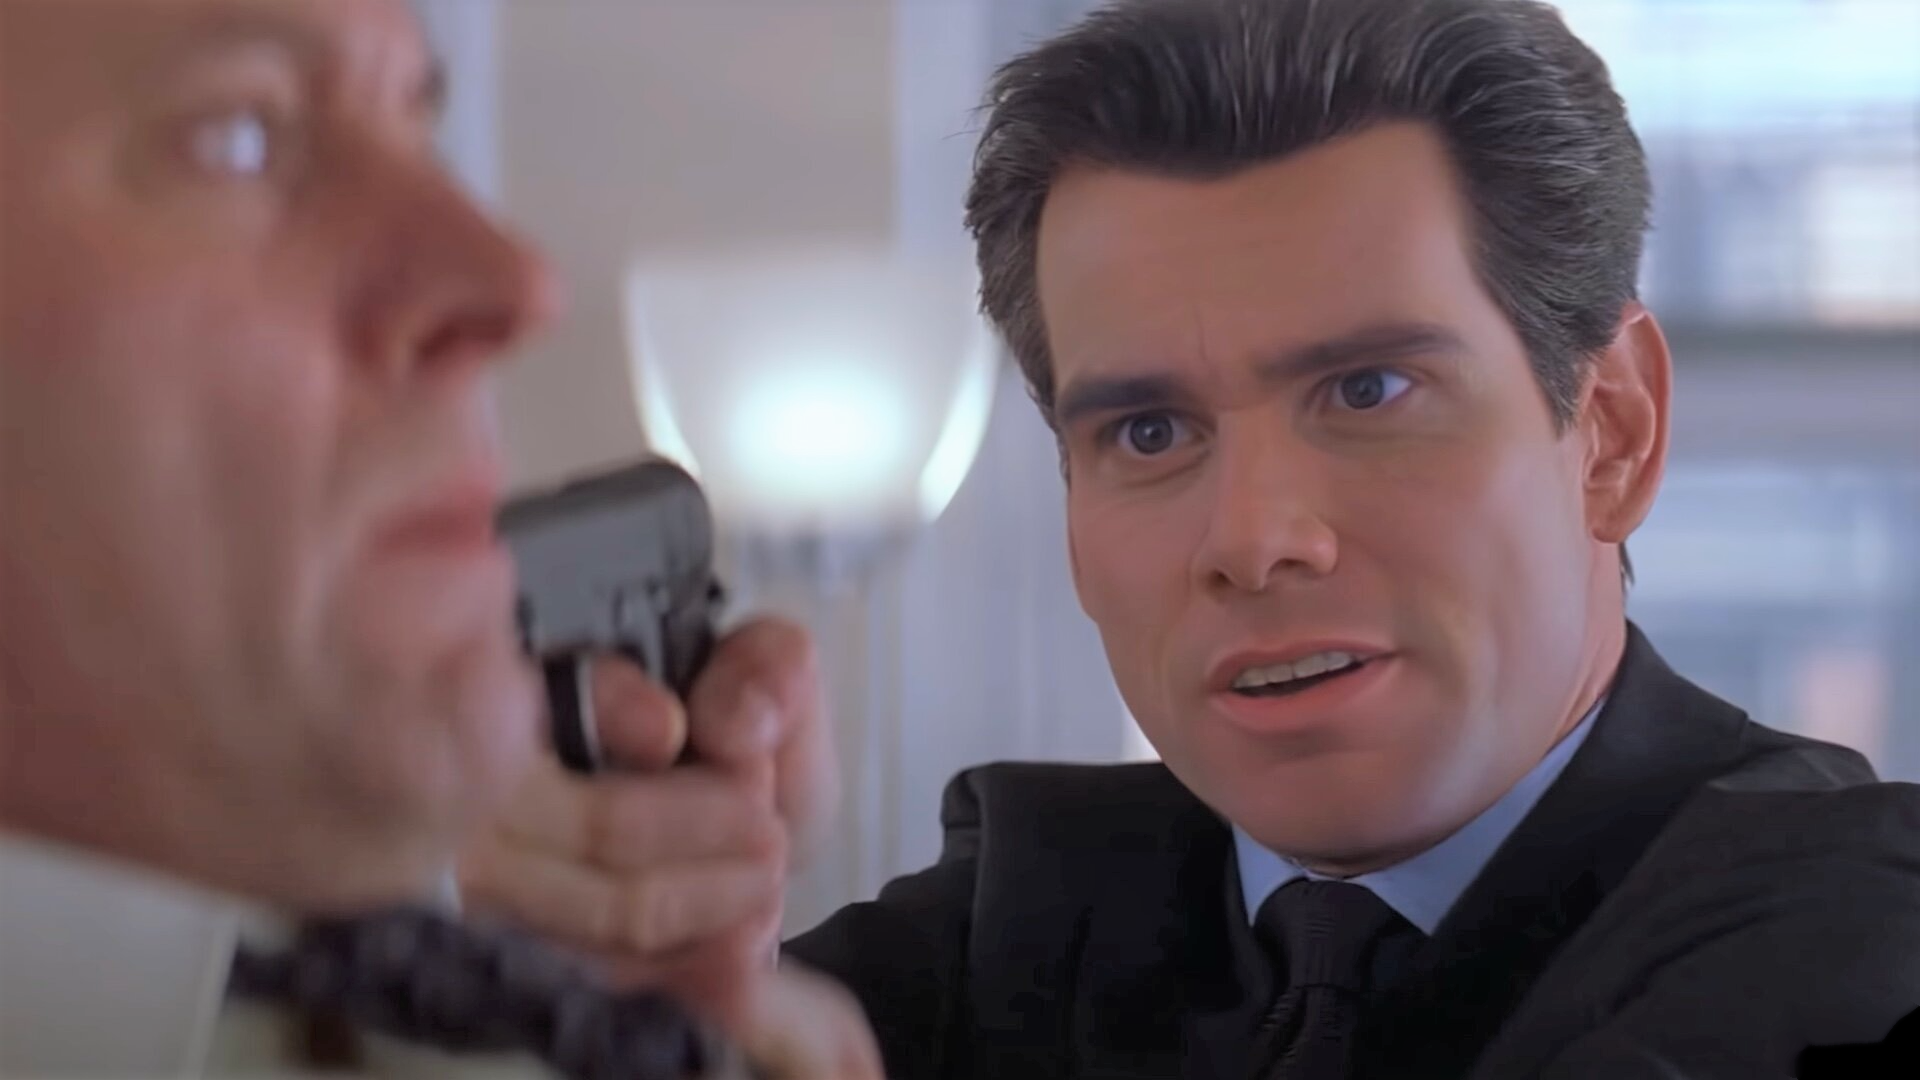 Jim Carrey is the new James Bond thanks to the great deepfake technology